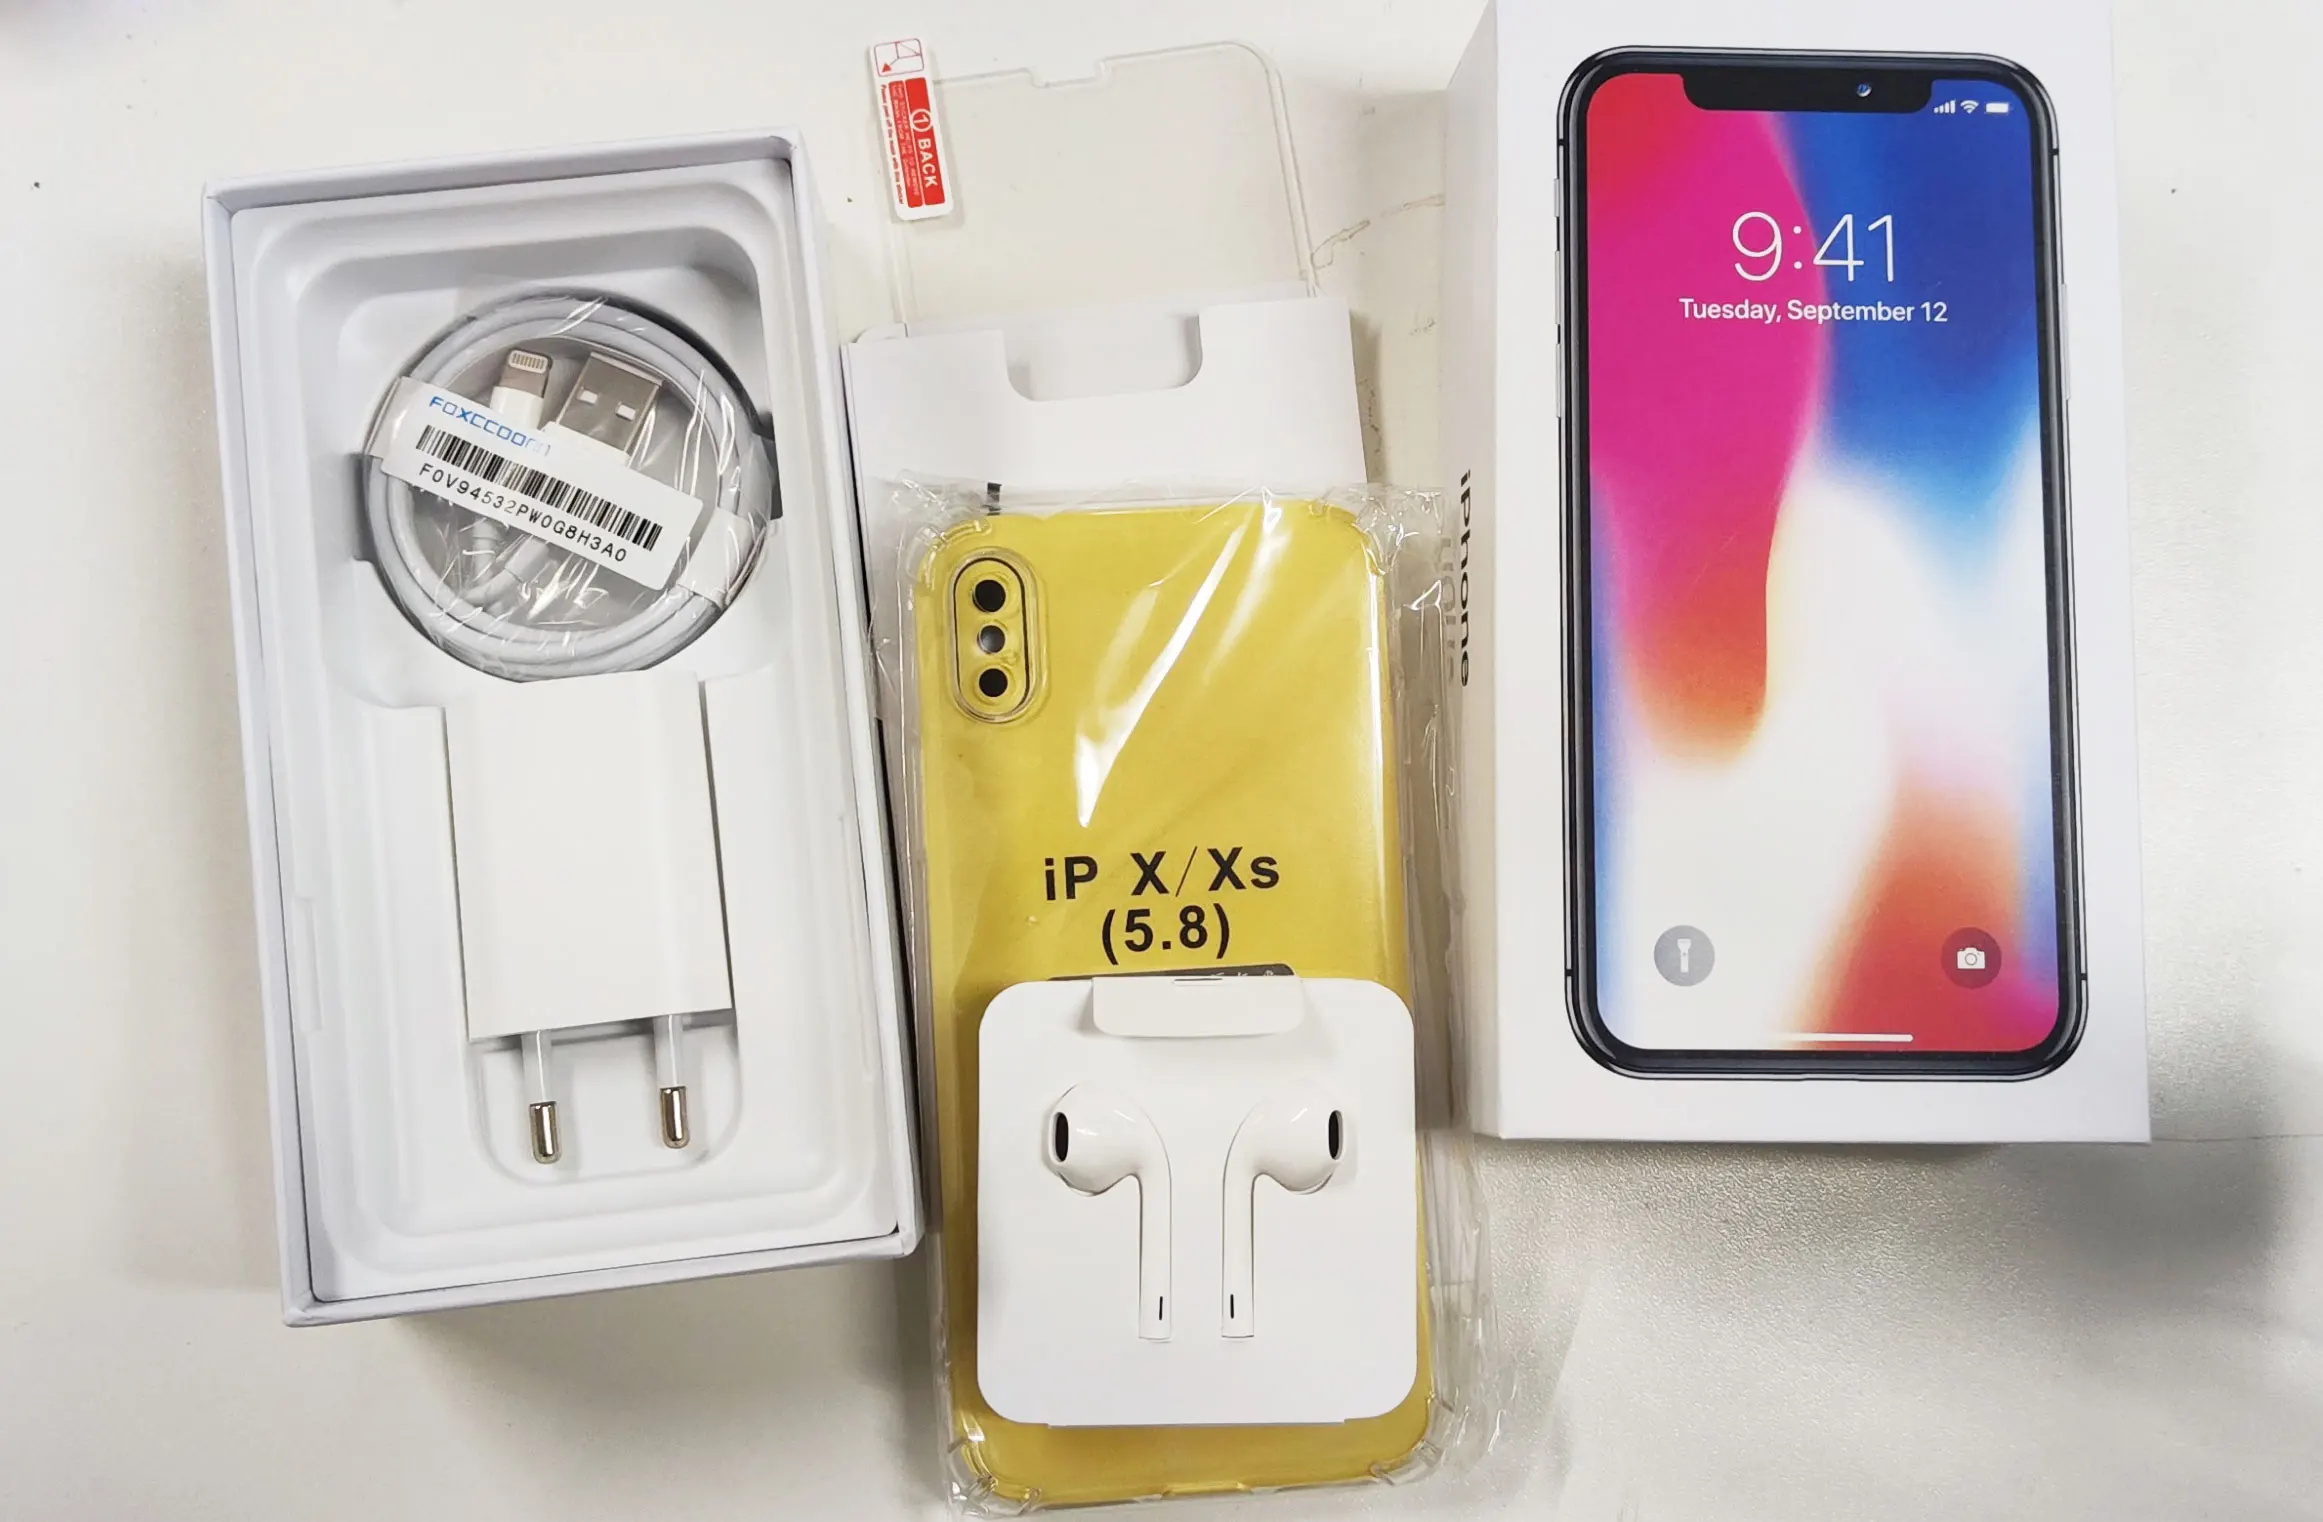 S3da63c7cfd2d4c30a8b79ef24a8822d1Z Used Unlocked Cell Phone Apple iPhone X Face ID 5.8" 3GB+64/256GB 4G LTE A11 CPU Hexa Core Wireless Charge